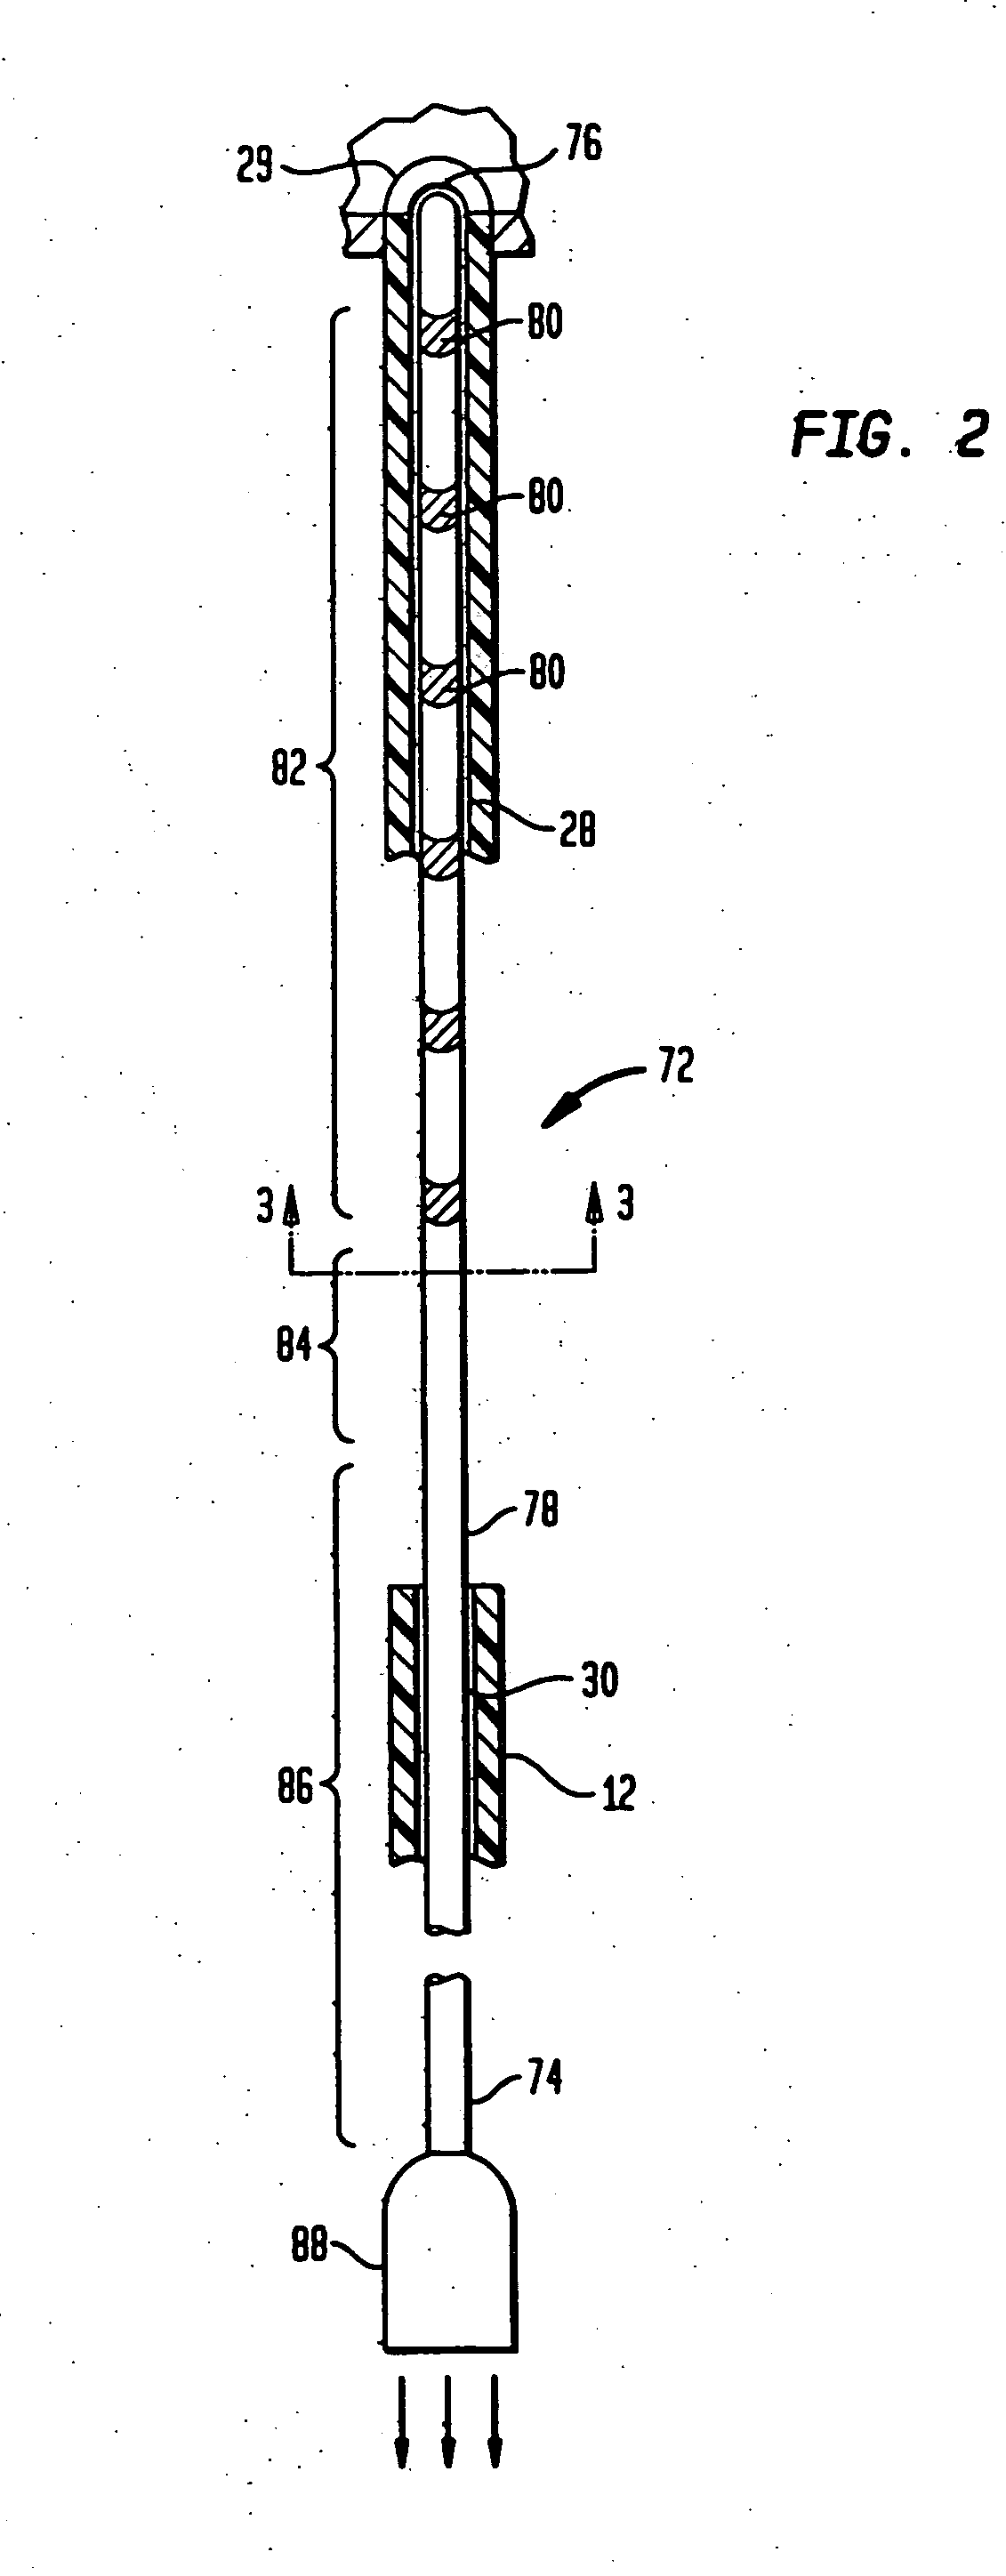 Ablation Devices with Sensor Structures